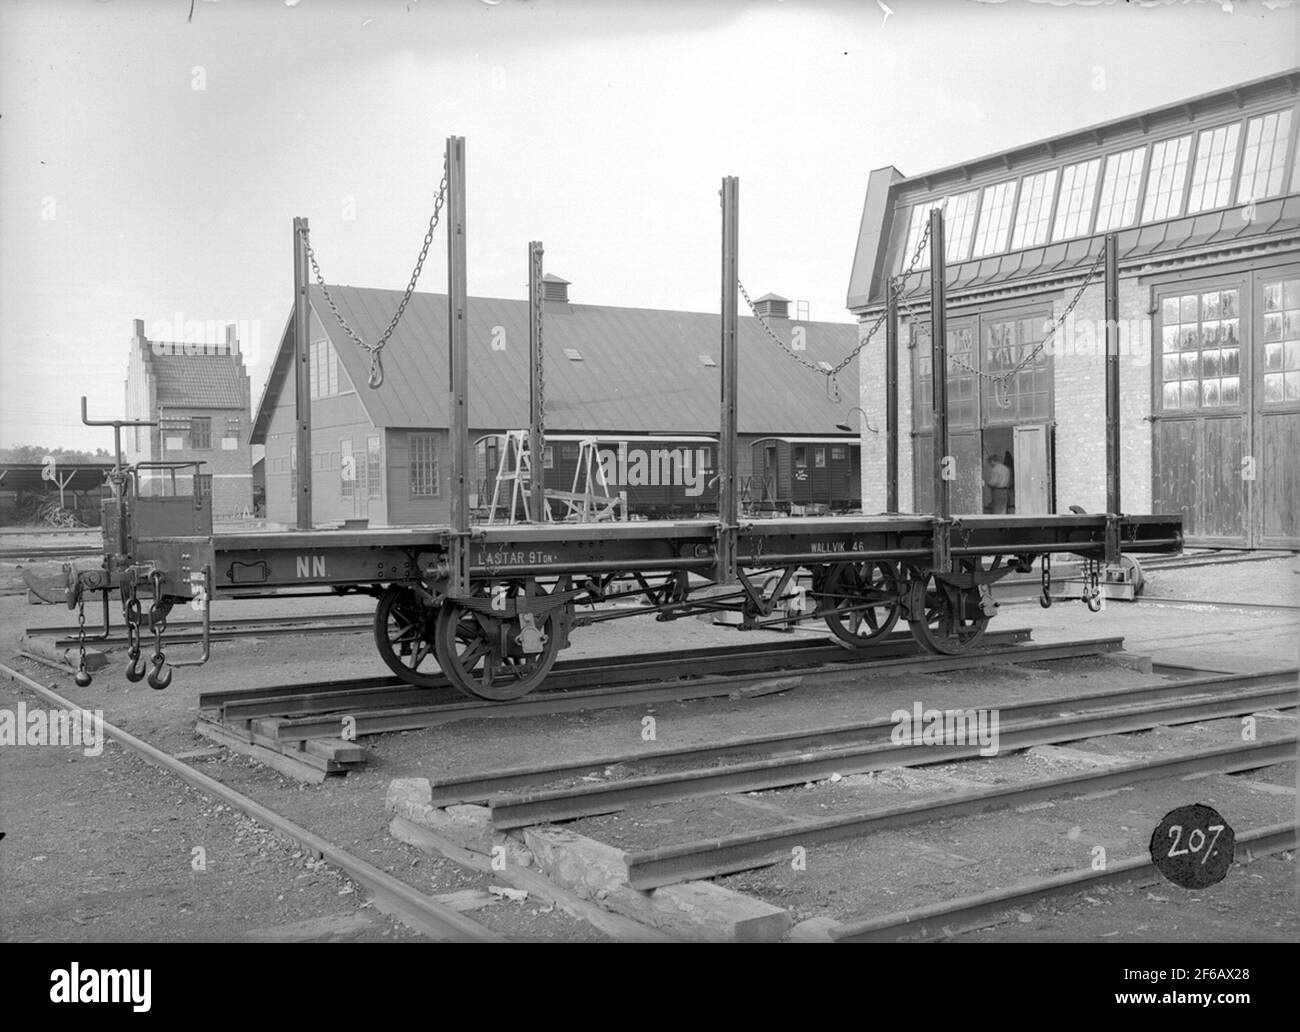 The goods wagon manufactured by the limited company Swedish railway workshops, ASJ, for Sulfit AB Ljusnan, cart-sided NN 46. Stock Photo